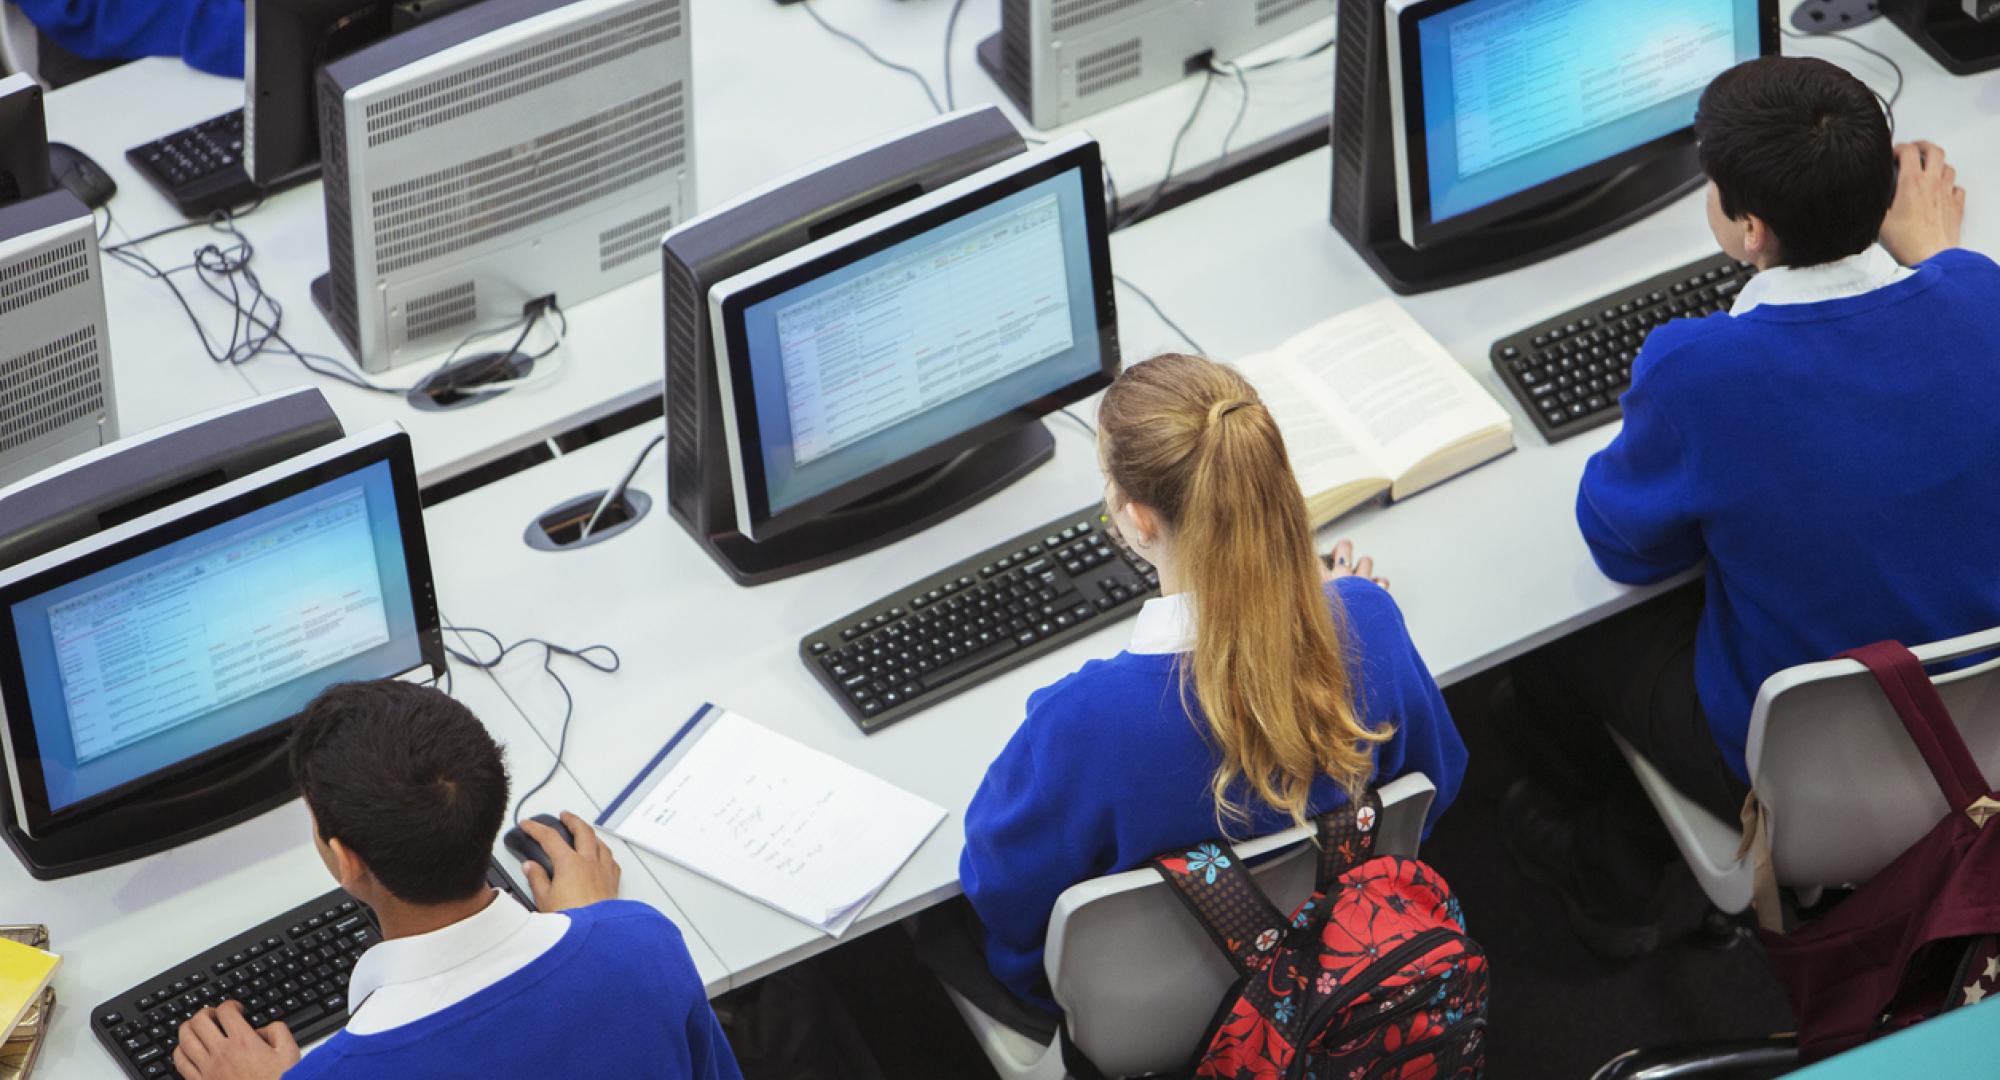 Pupils sat working on computers in a classroom